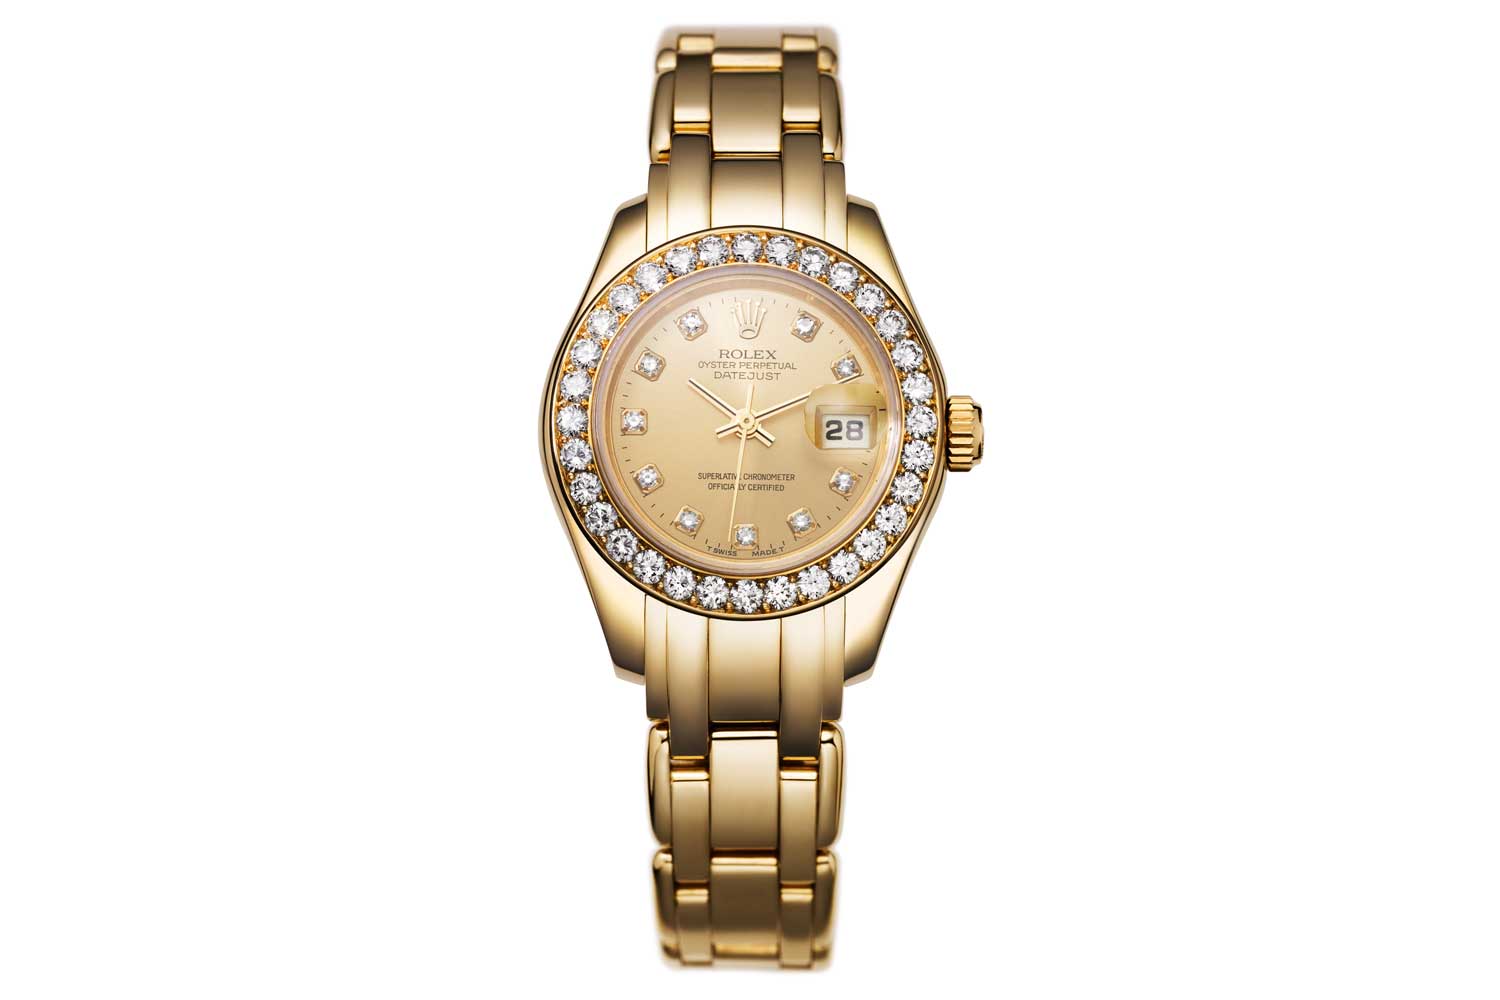 In 1992, the Lady-Datejust evolved even more, with the introduction of the Pearlmaster